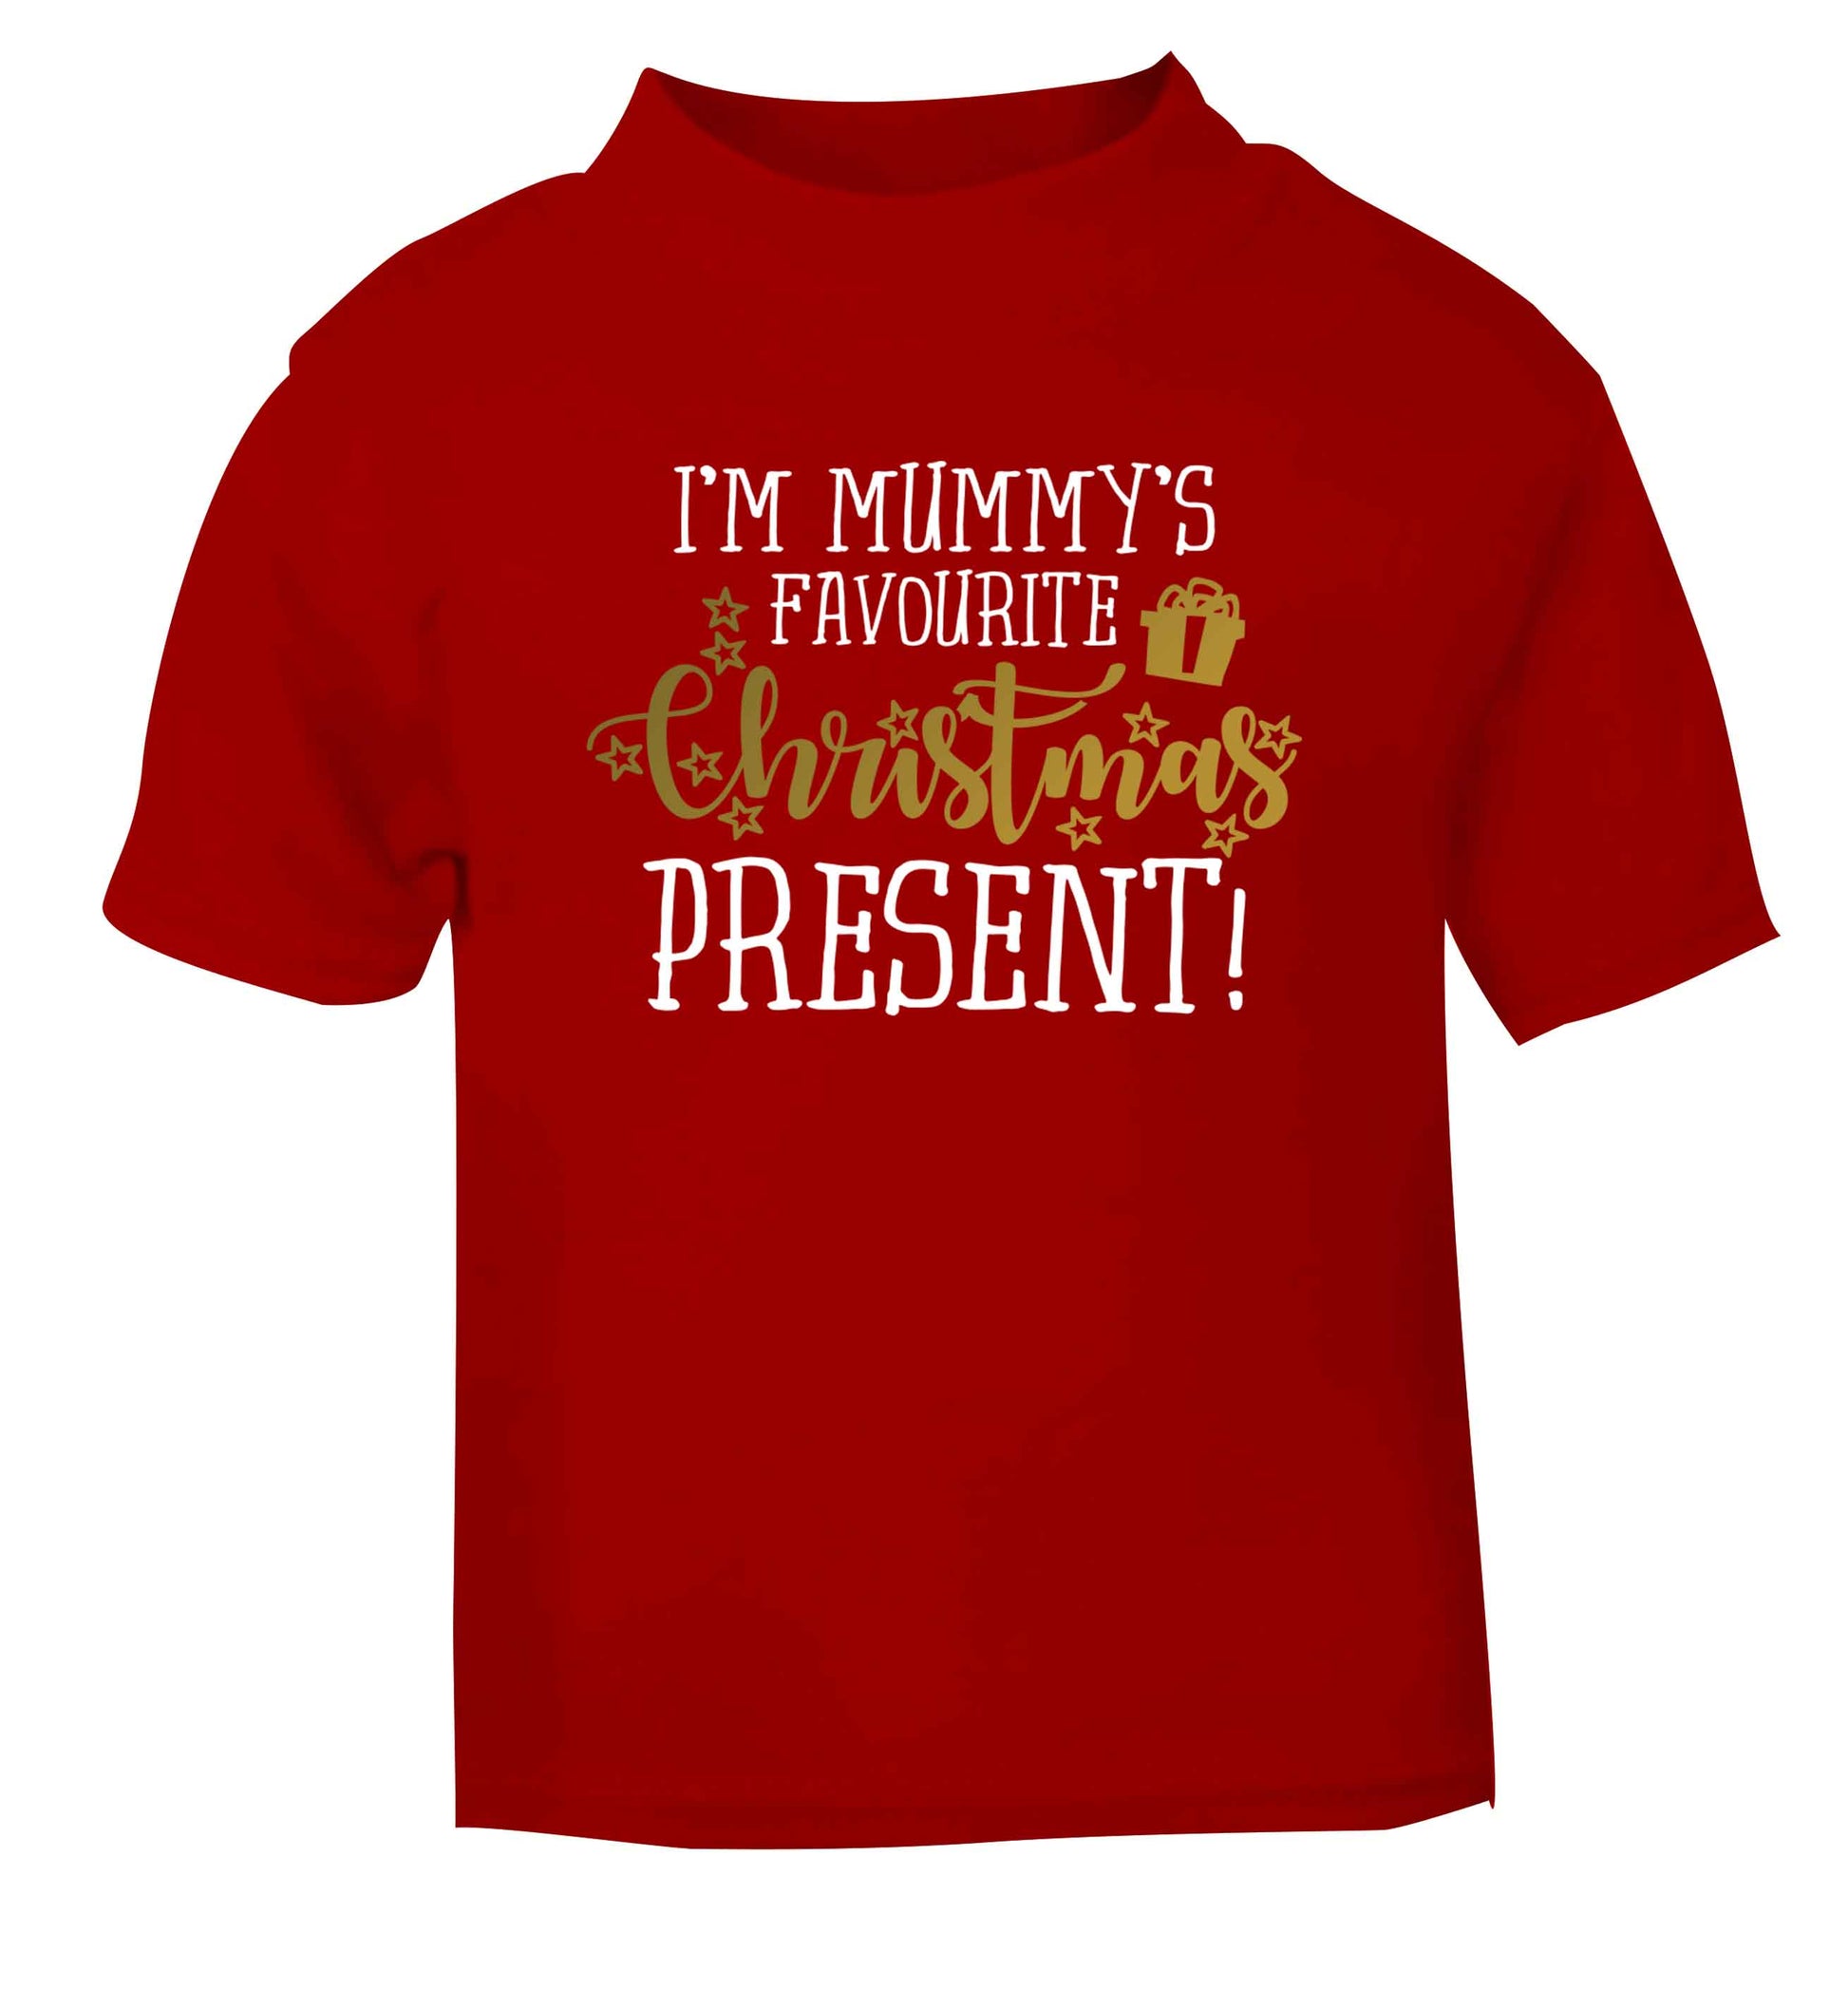 I'm Mummy's favourite Christmas present red Baby Toddler Tshirt 2 Years